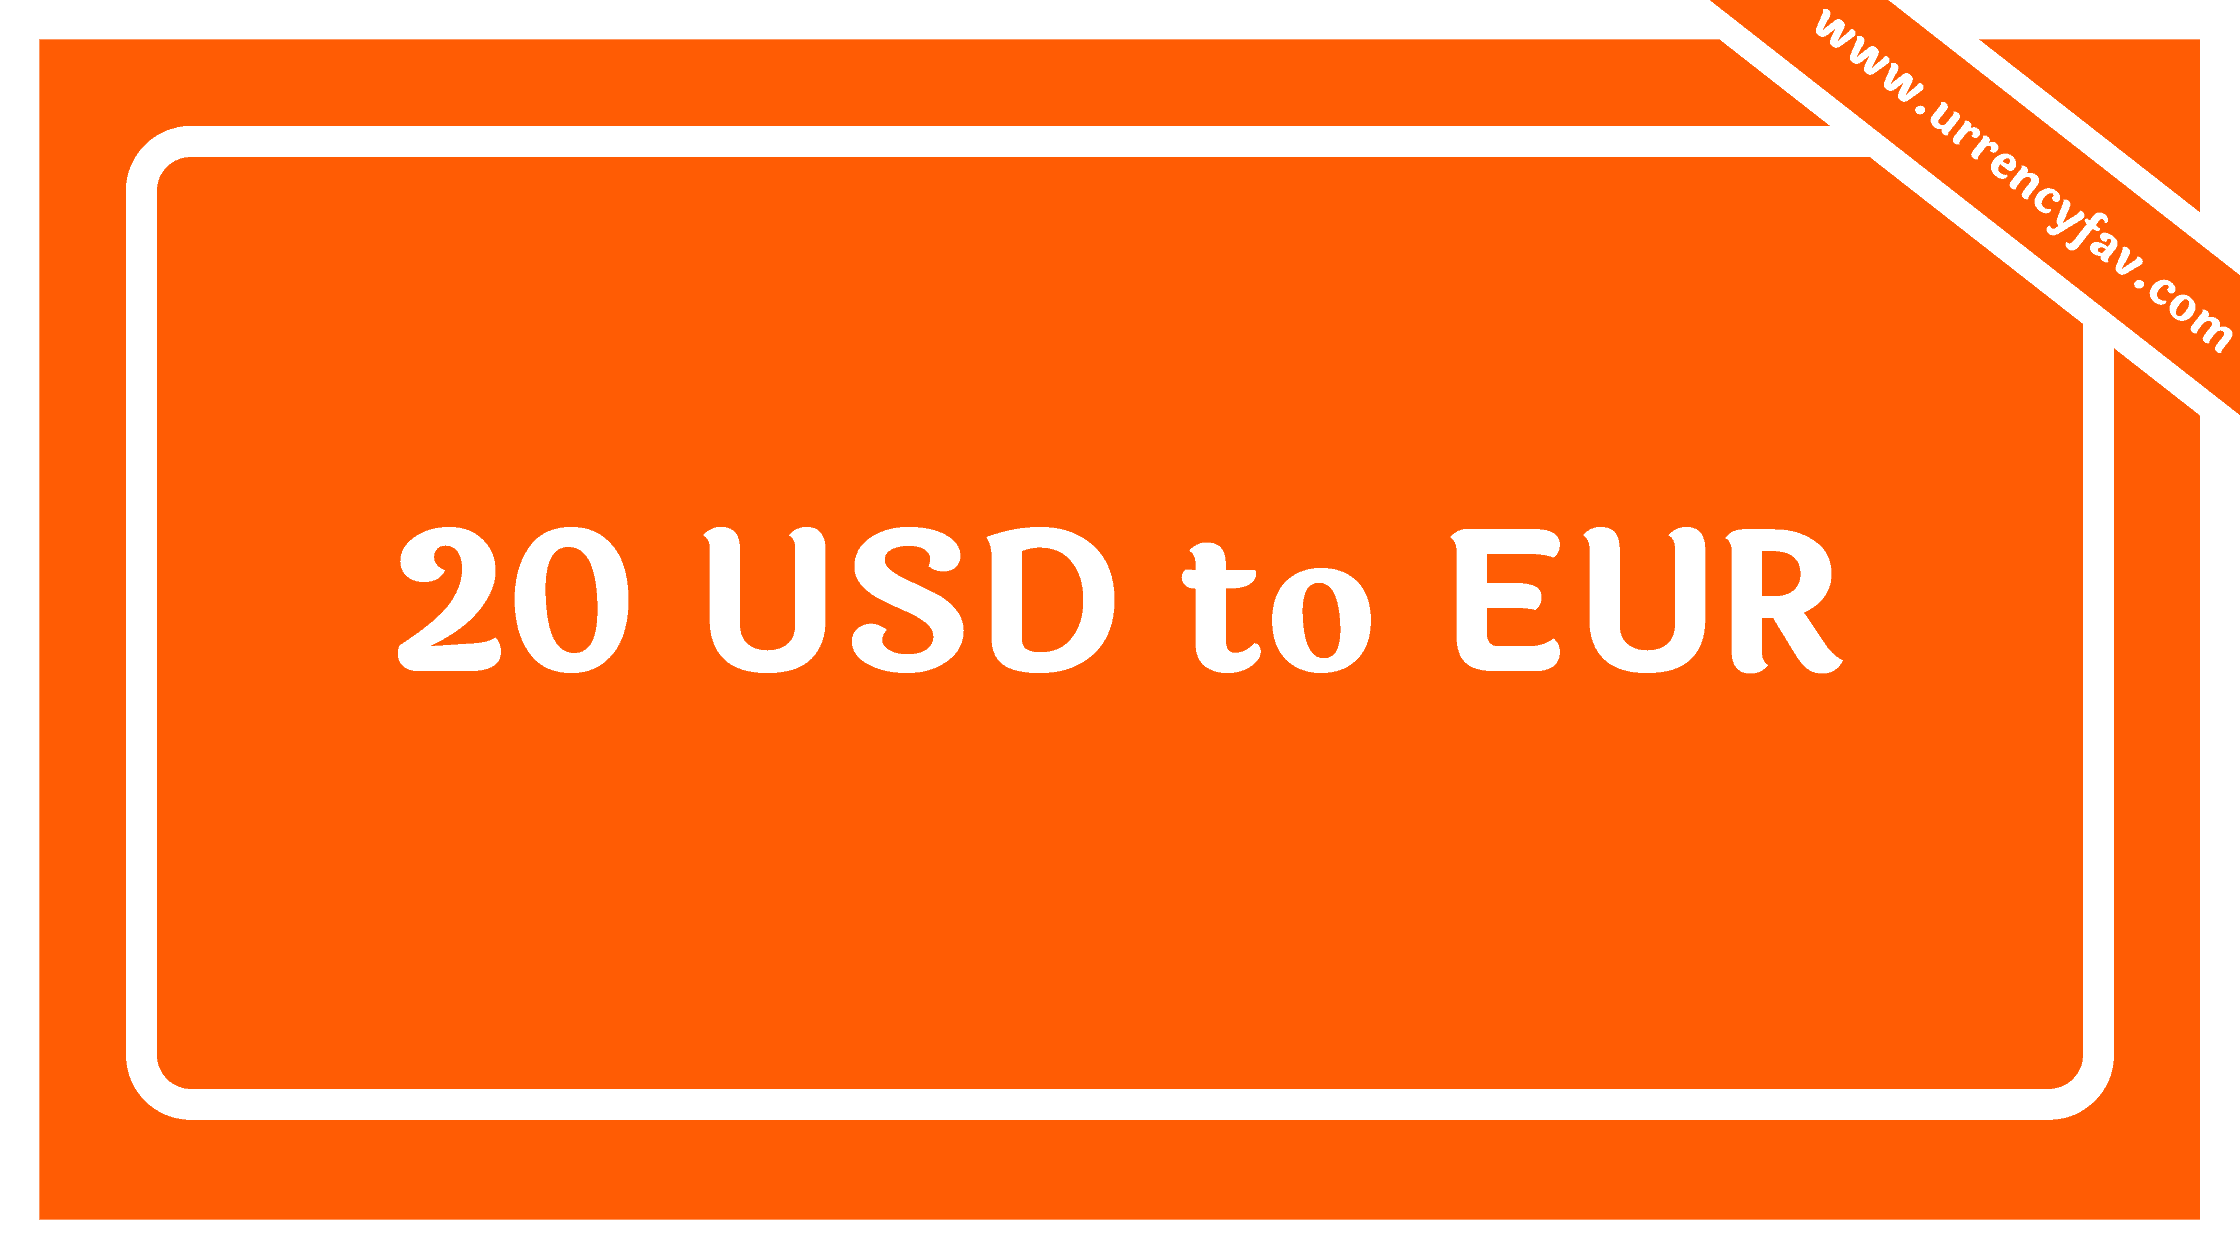 20 USD to EUR